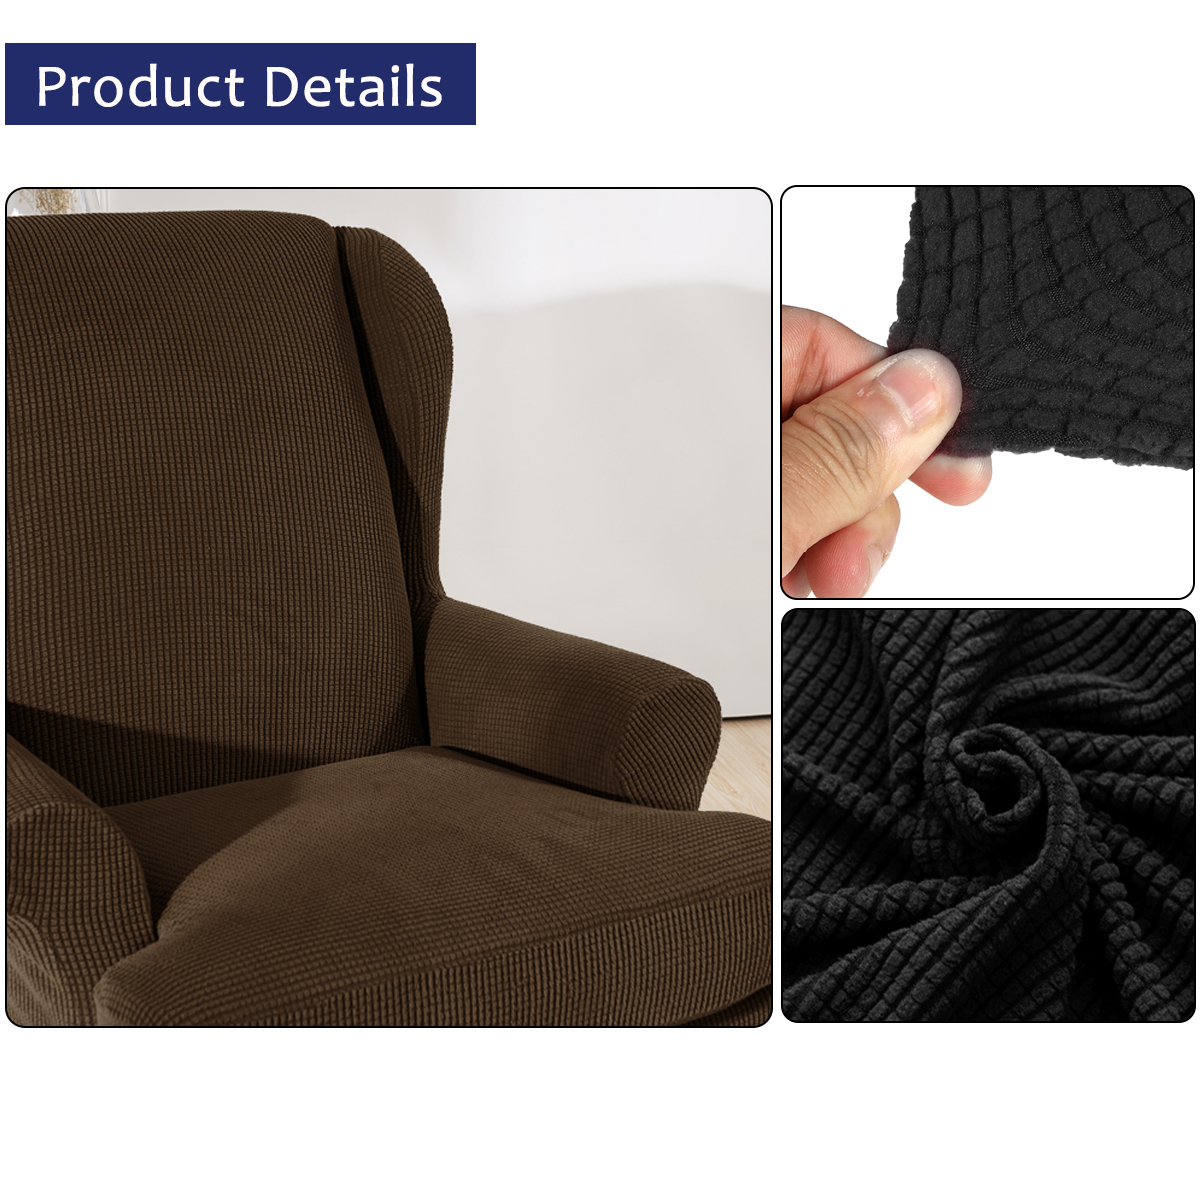 Waterproof-Elastic-Armchair-Wingback-Wing-Chair-Slipcover-Protector-Covers-1635286-4